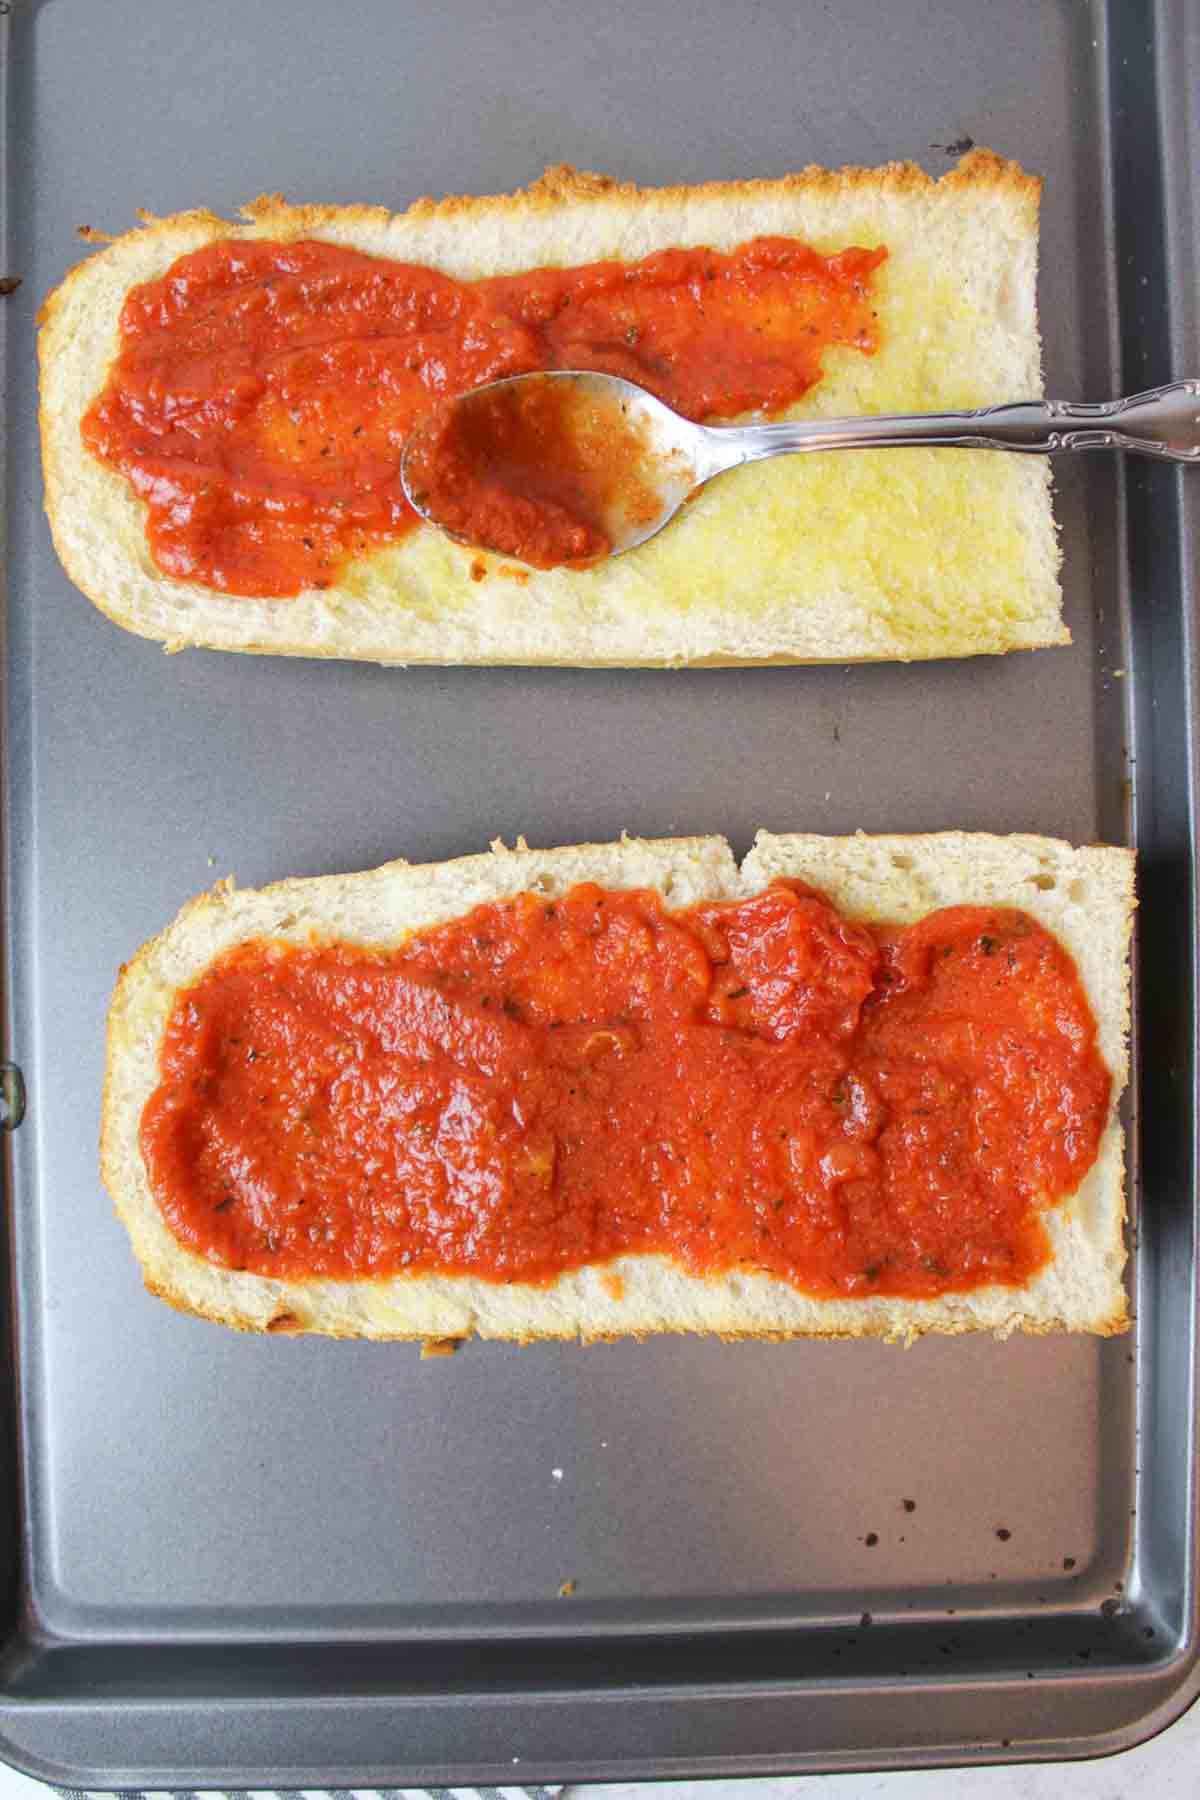 spread pizza sauce on the french bread to make pizza.